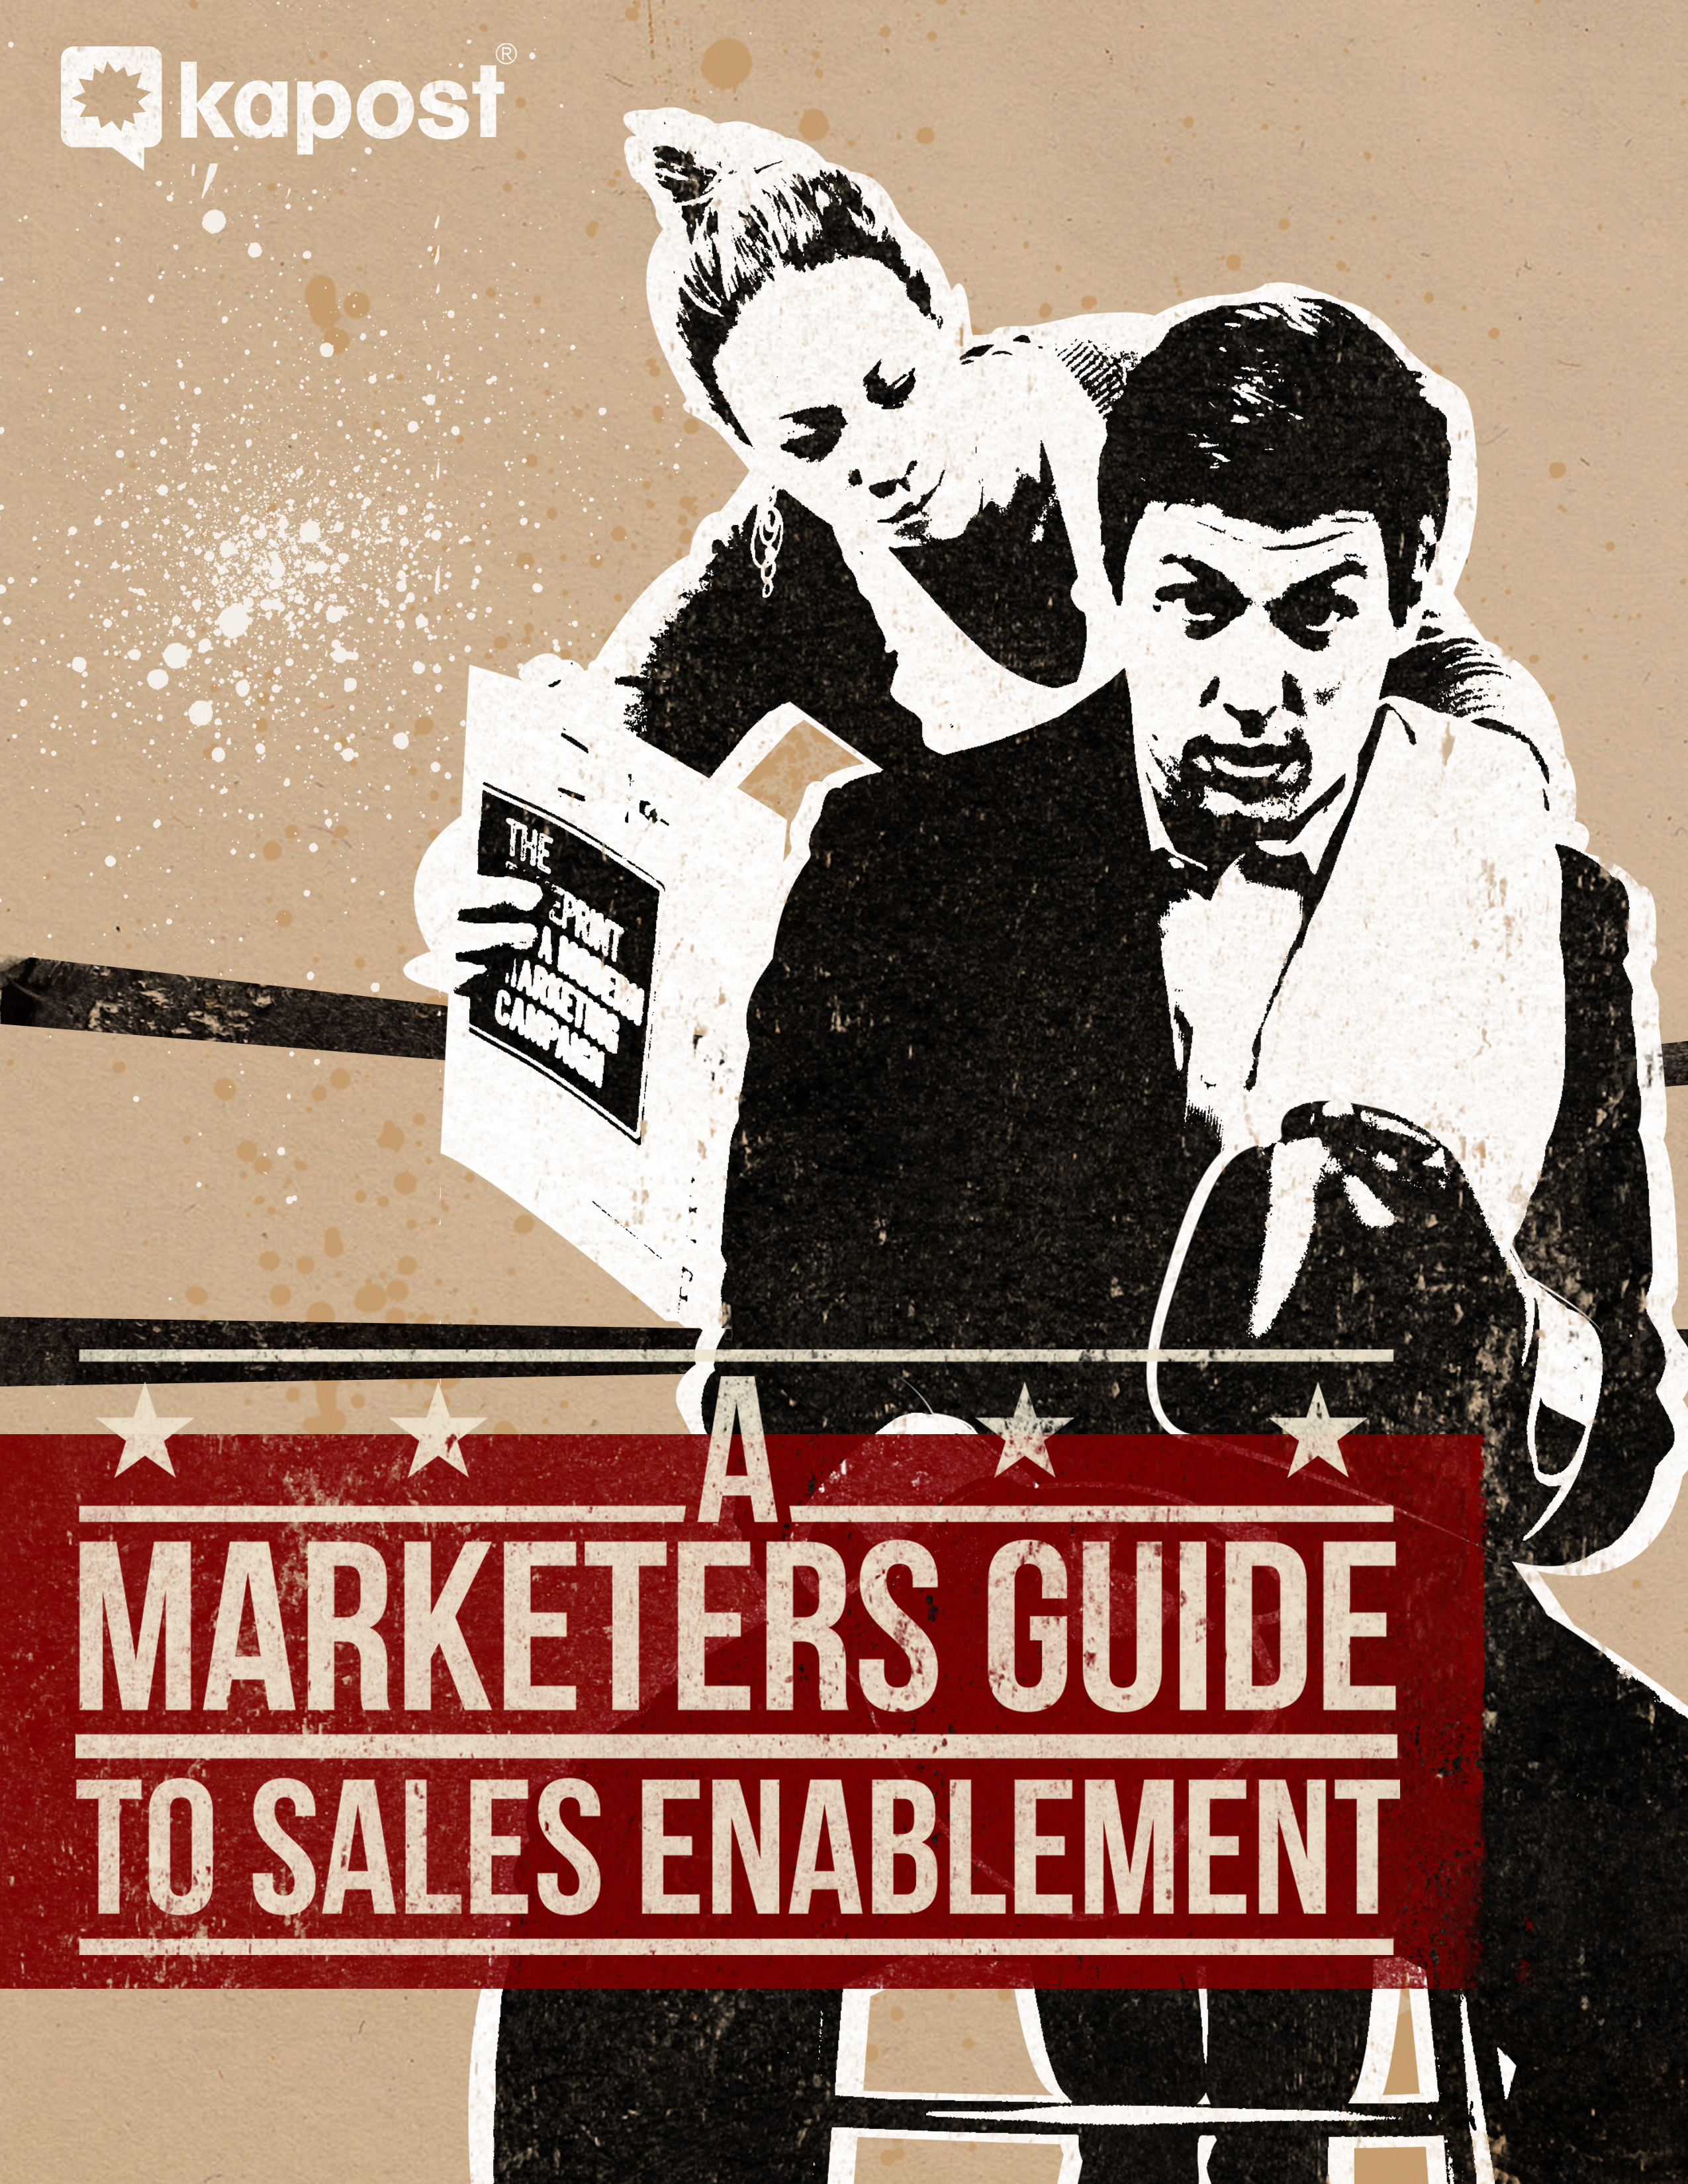 a marketer's guide to sales enablement